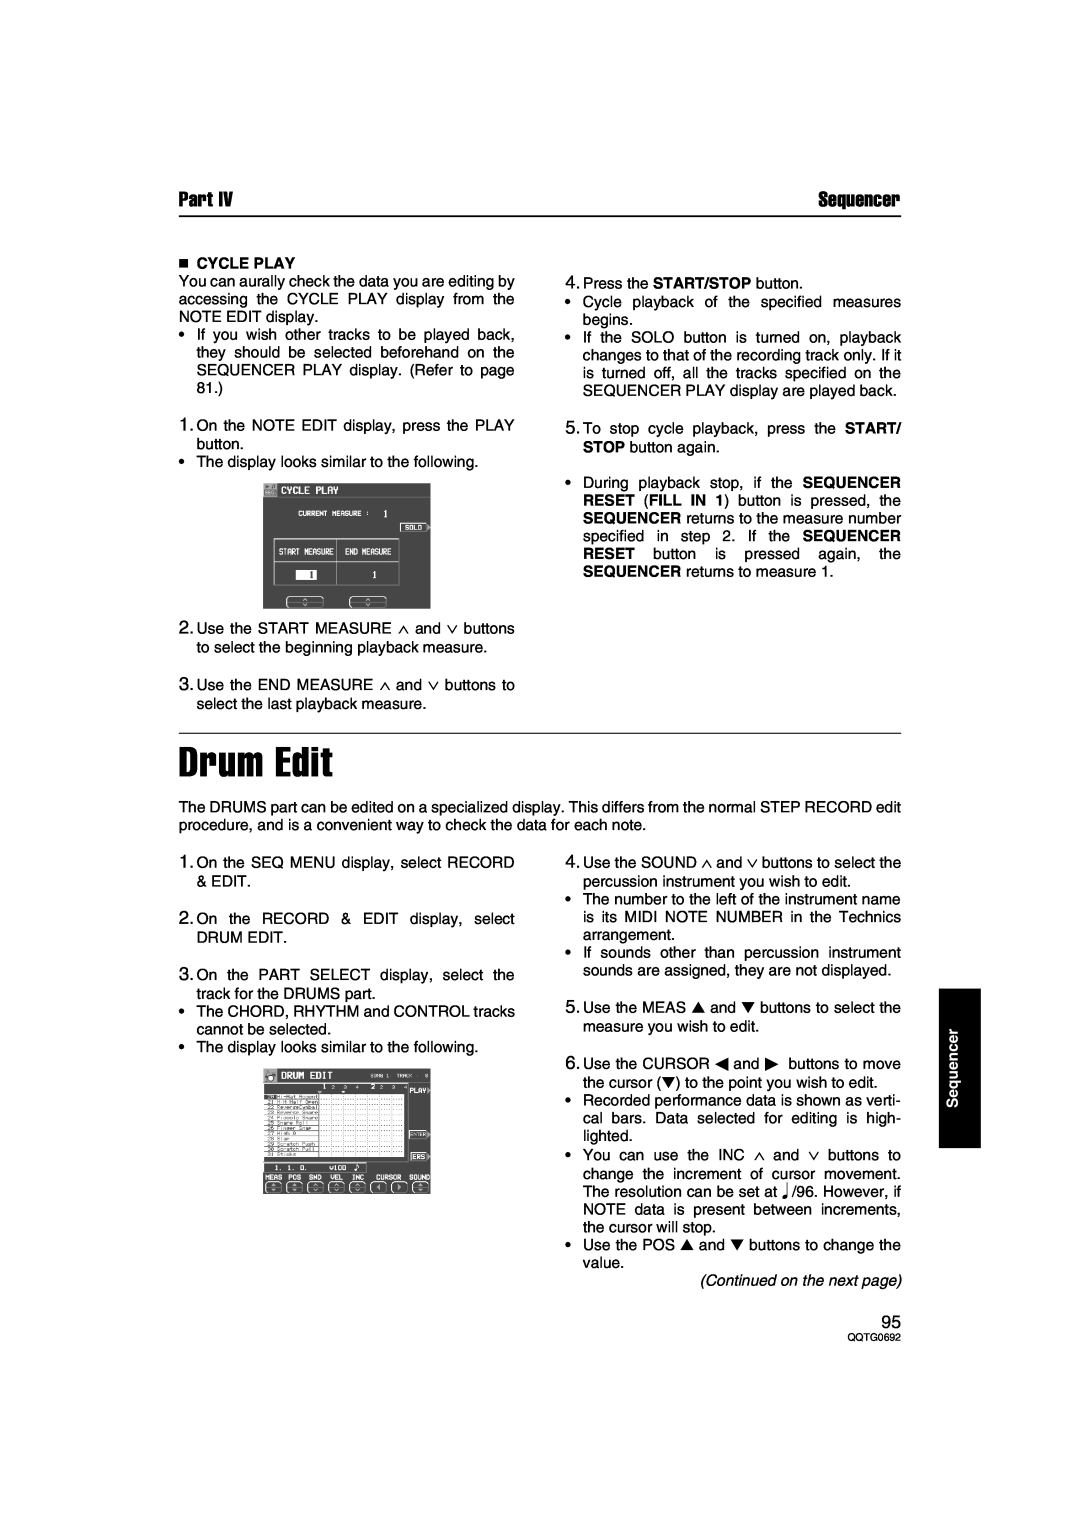 Panasonic SX-KN2400, SX-KN2600 manual Drum Edit,  Cycle Play, Part, Sequencer, Continued on the next page 